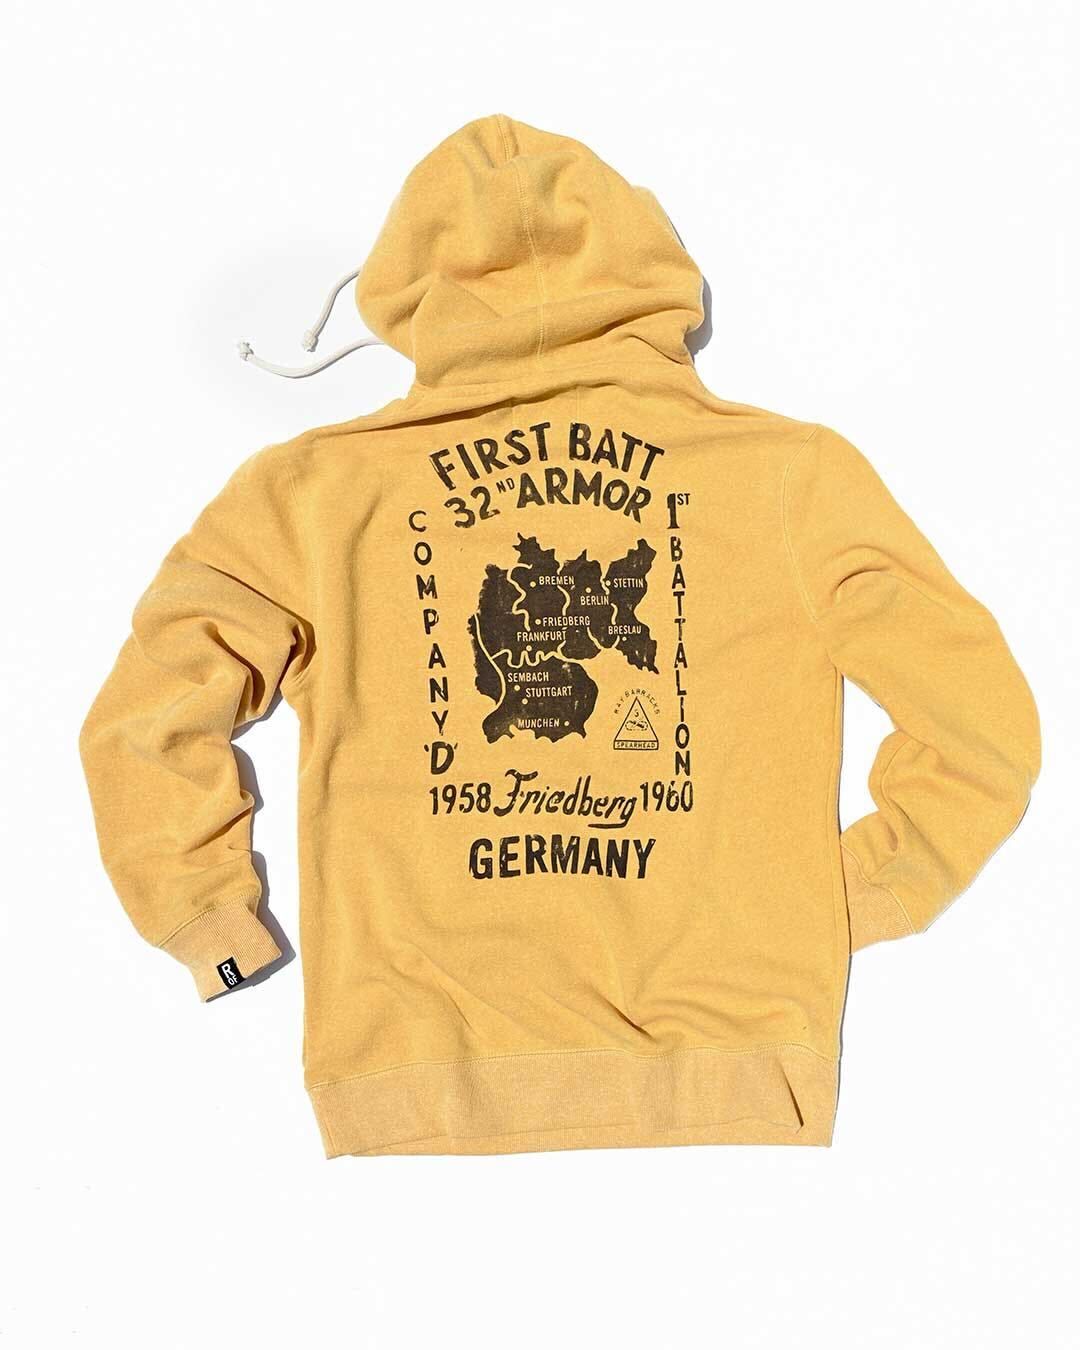 Elvis 1958 Military Gold Hoody - Roots of Fight Canada